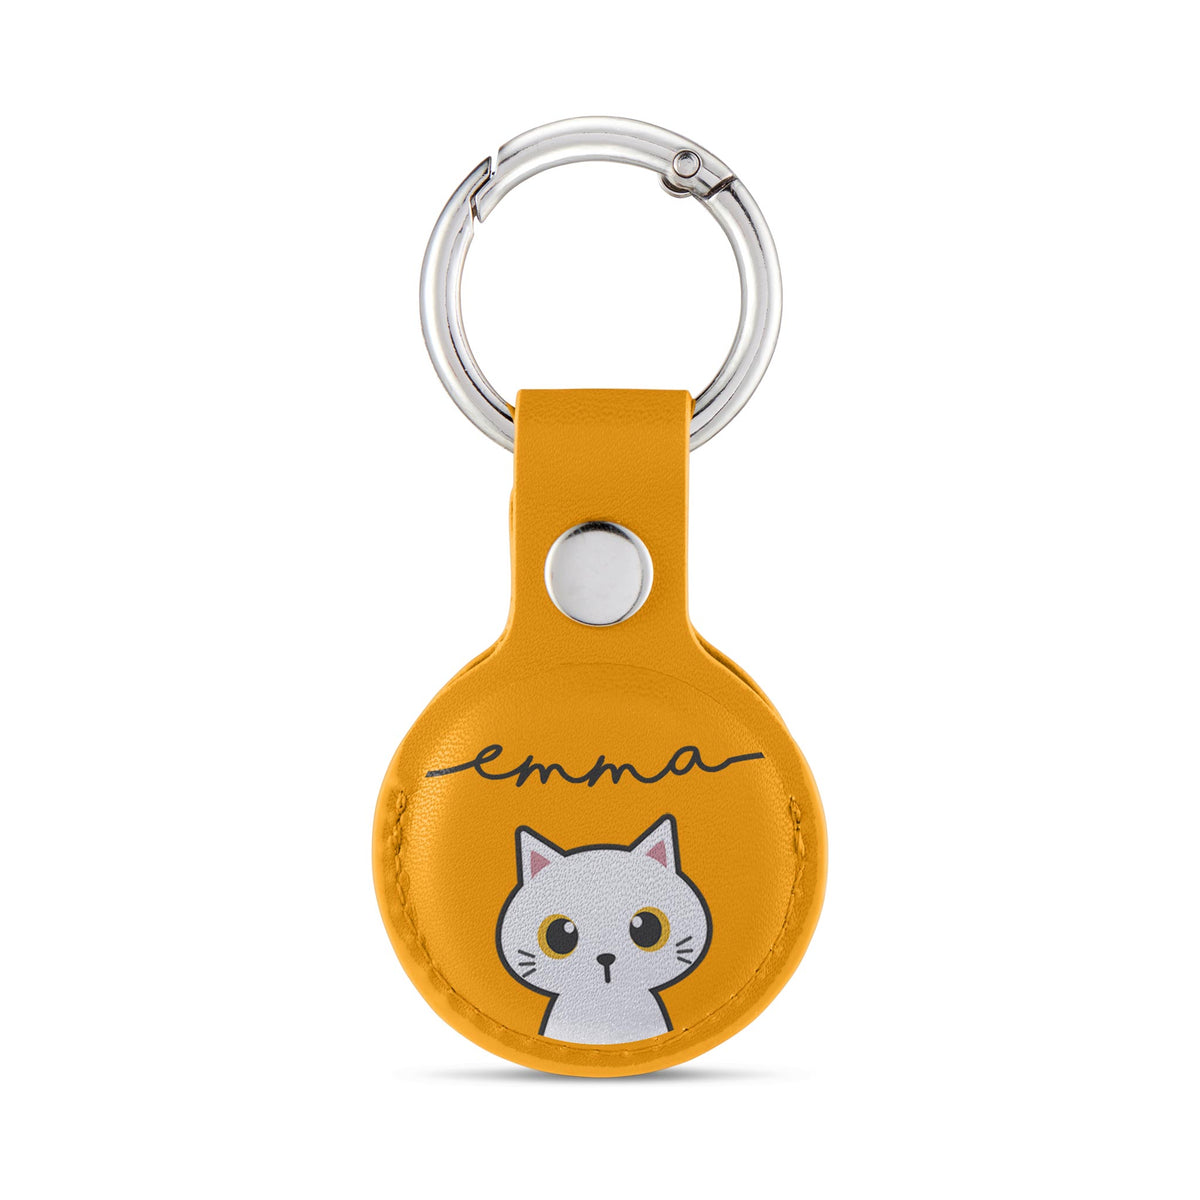 Personalised AirTag Case Keyring Holder Keychain Holder for Air Tag Tracking Device White Kitten Cat Name on Yellow